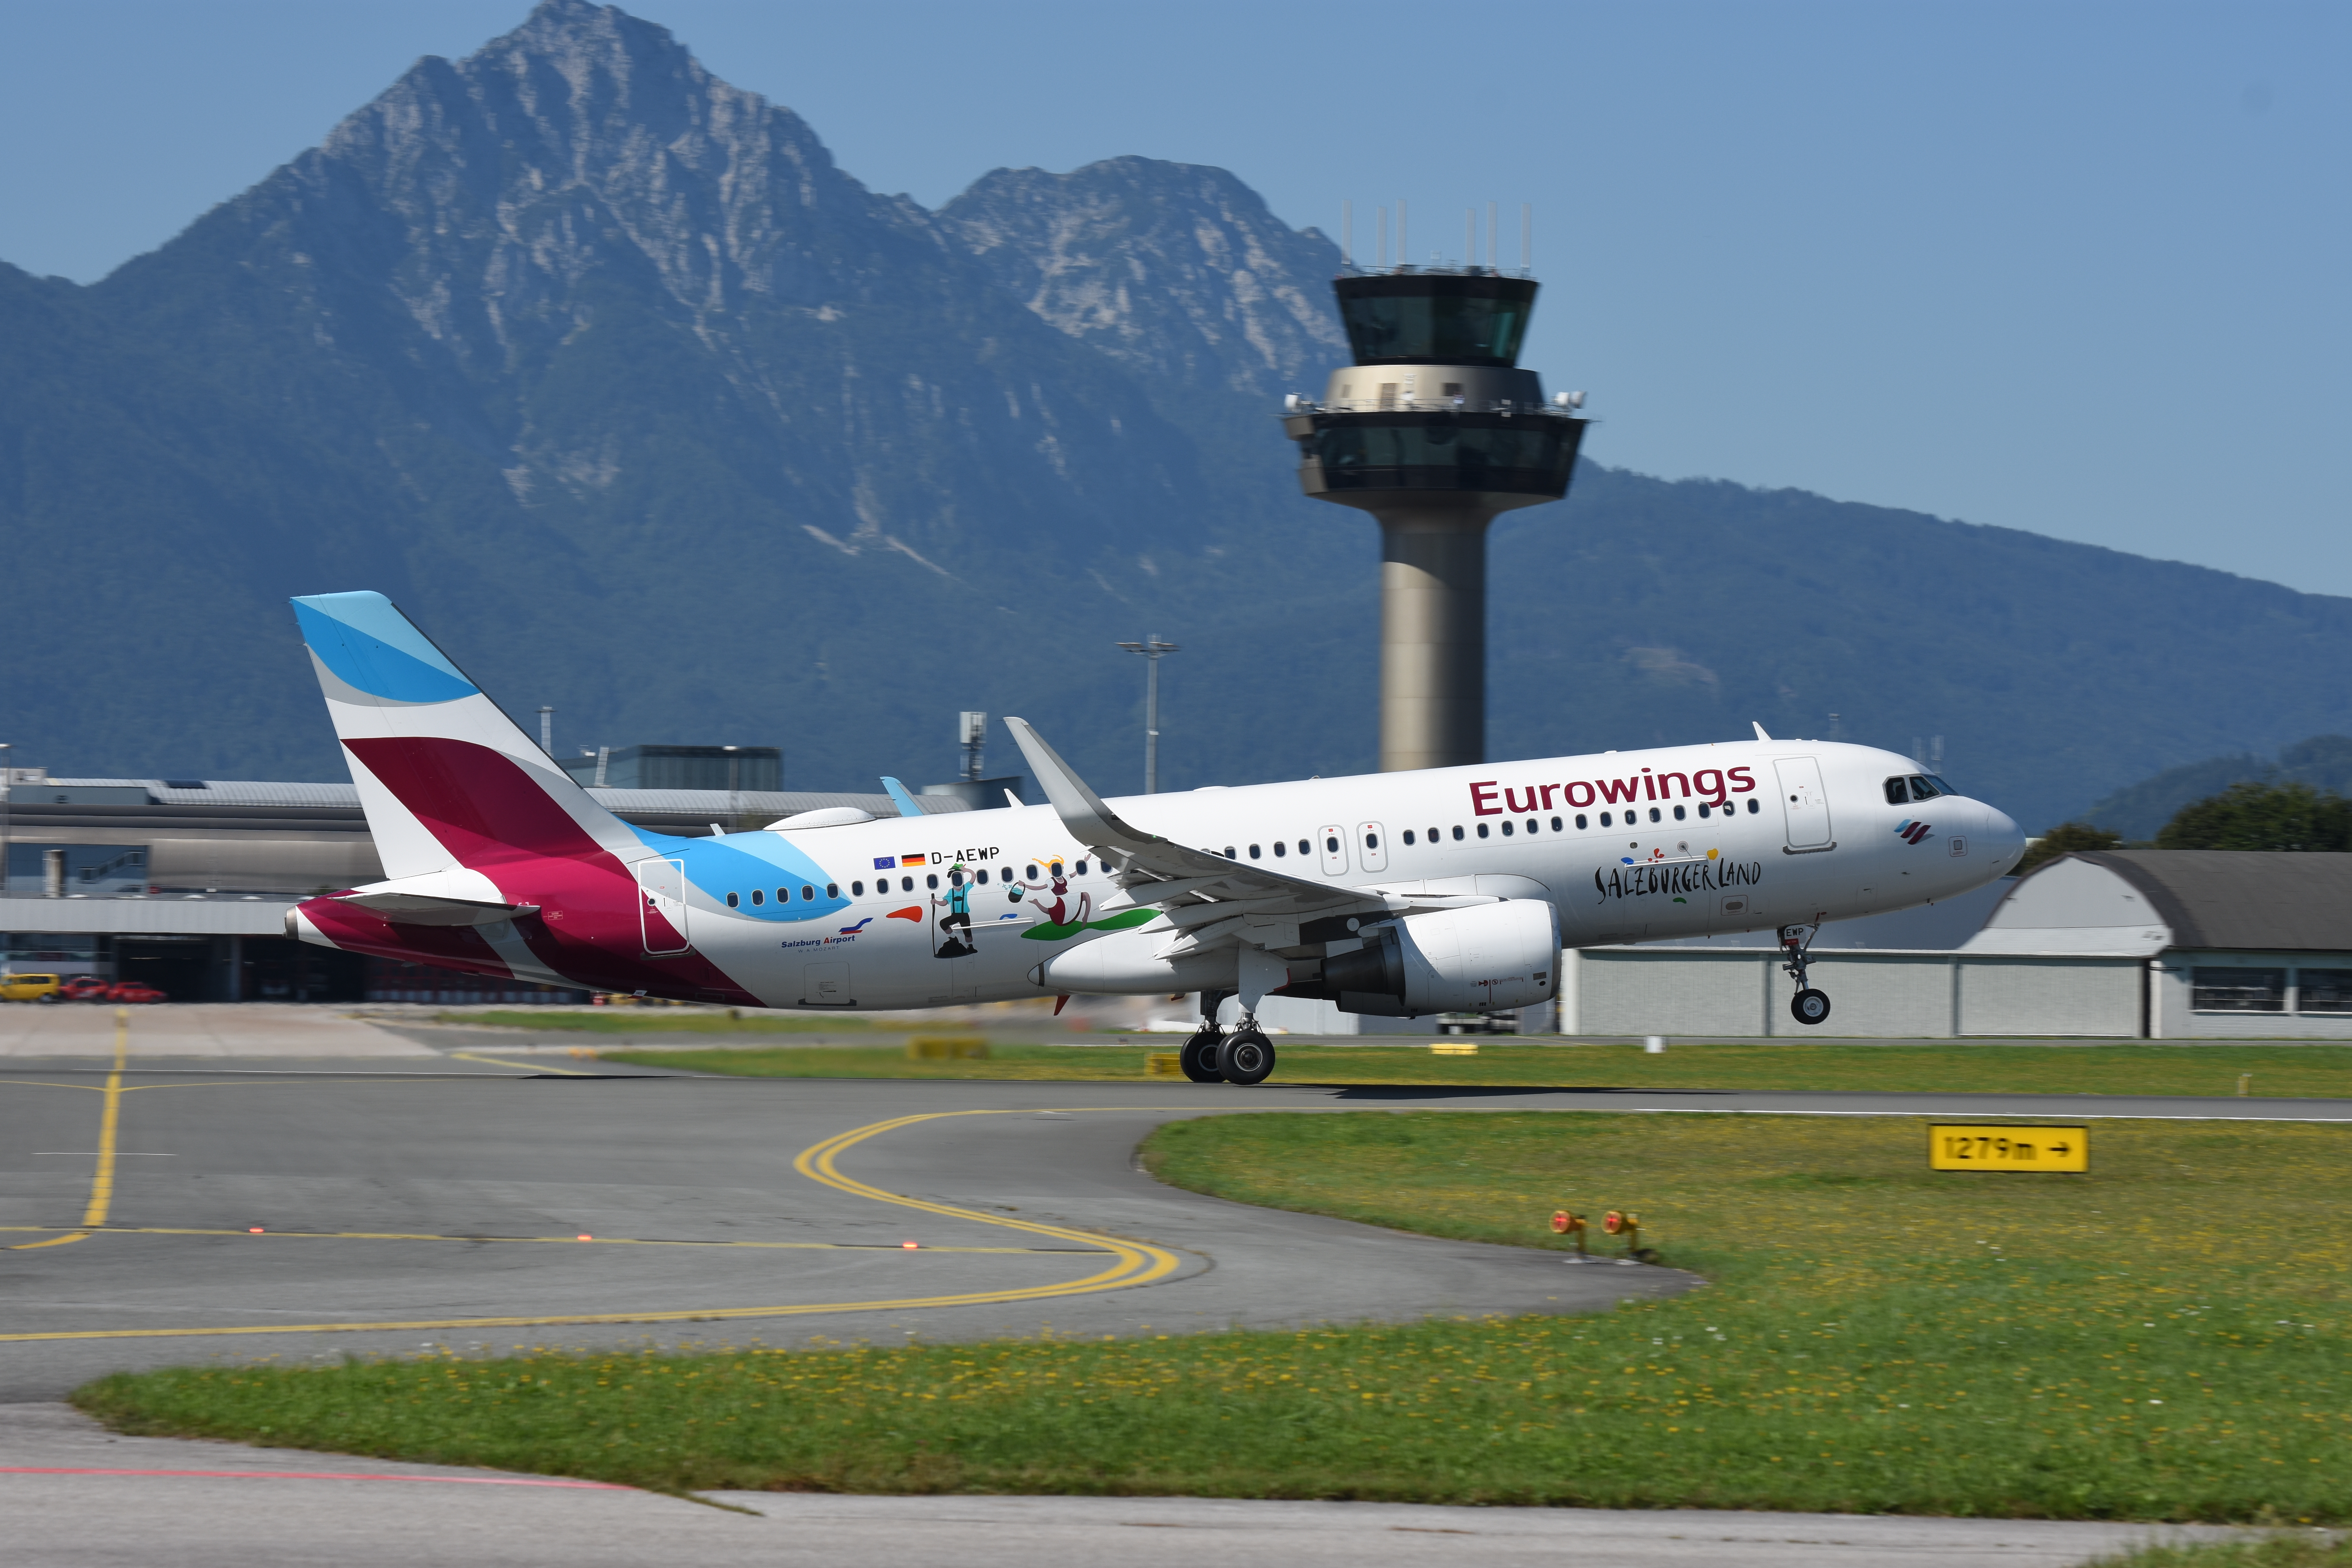 Eurowings - important airline partner at Salzburg Airport